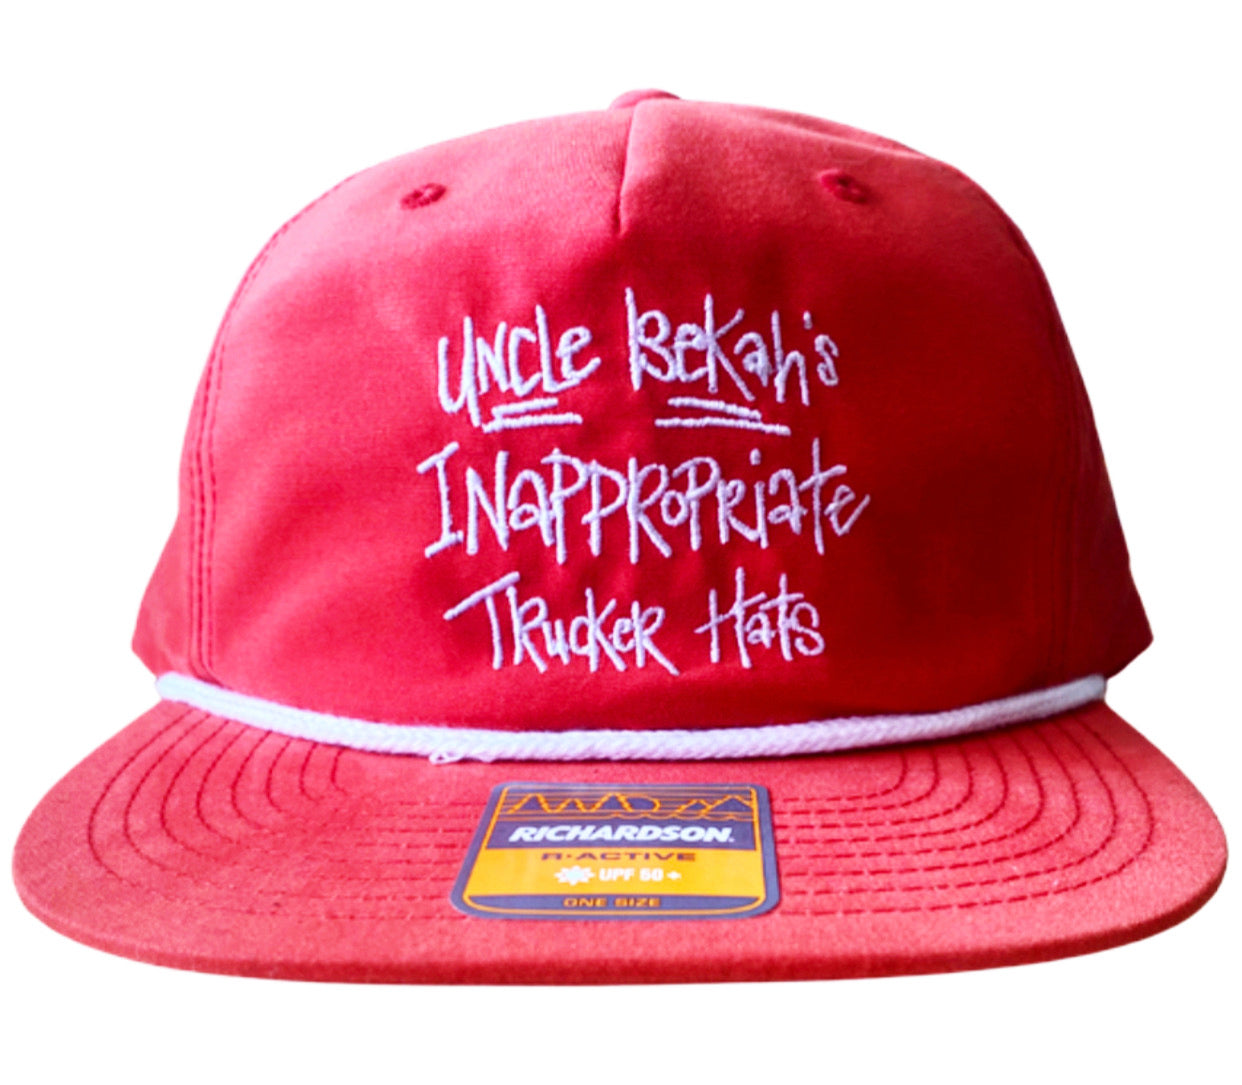 Embroidered Inapppropriate Trucker Hats Logo